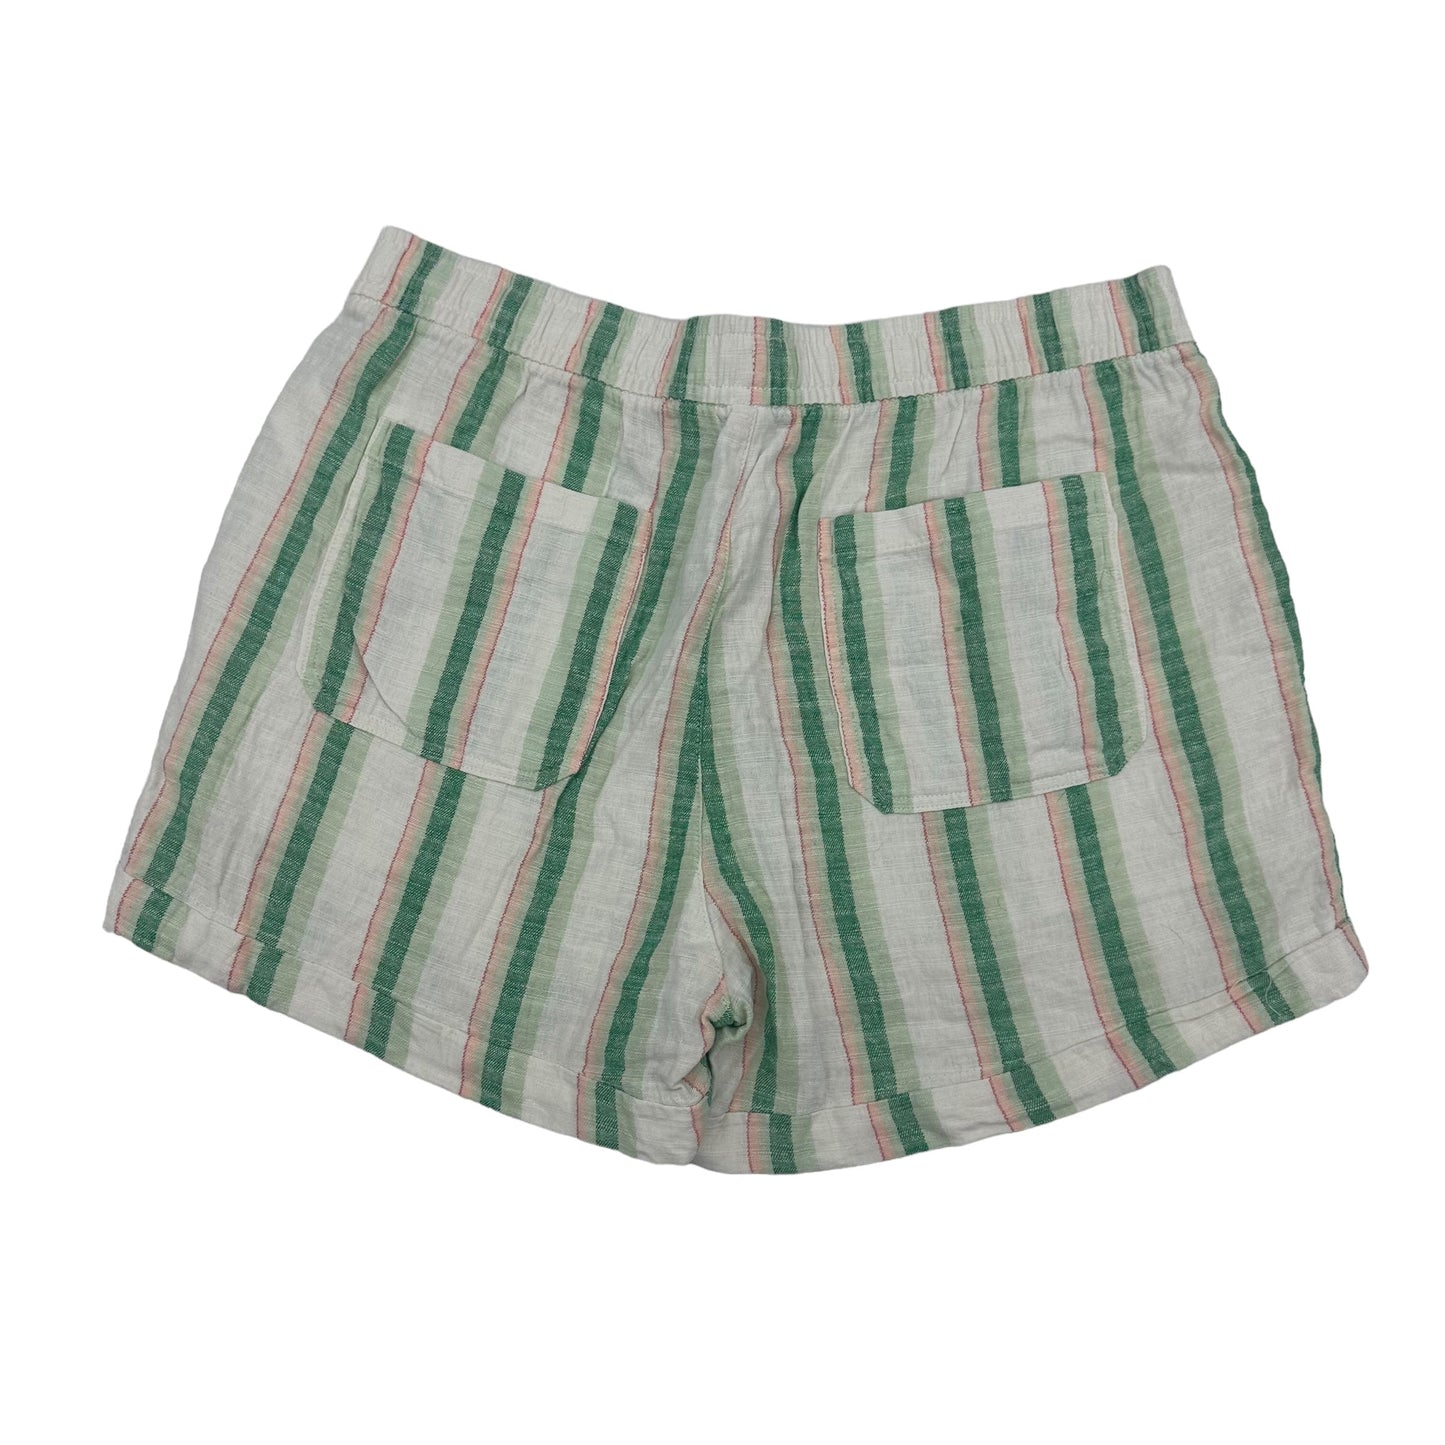 CREAM & GREEN OLD NAVY SHORTS, Size L